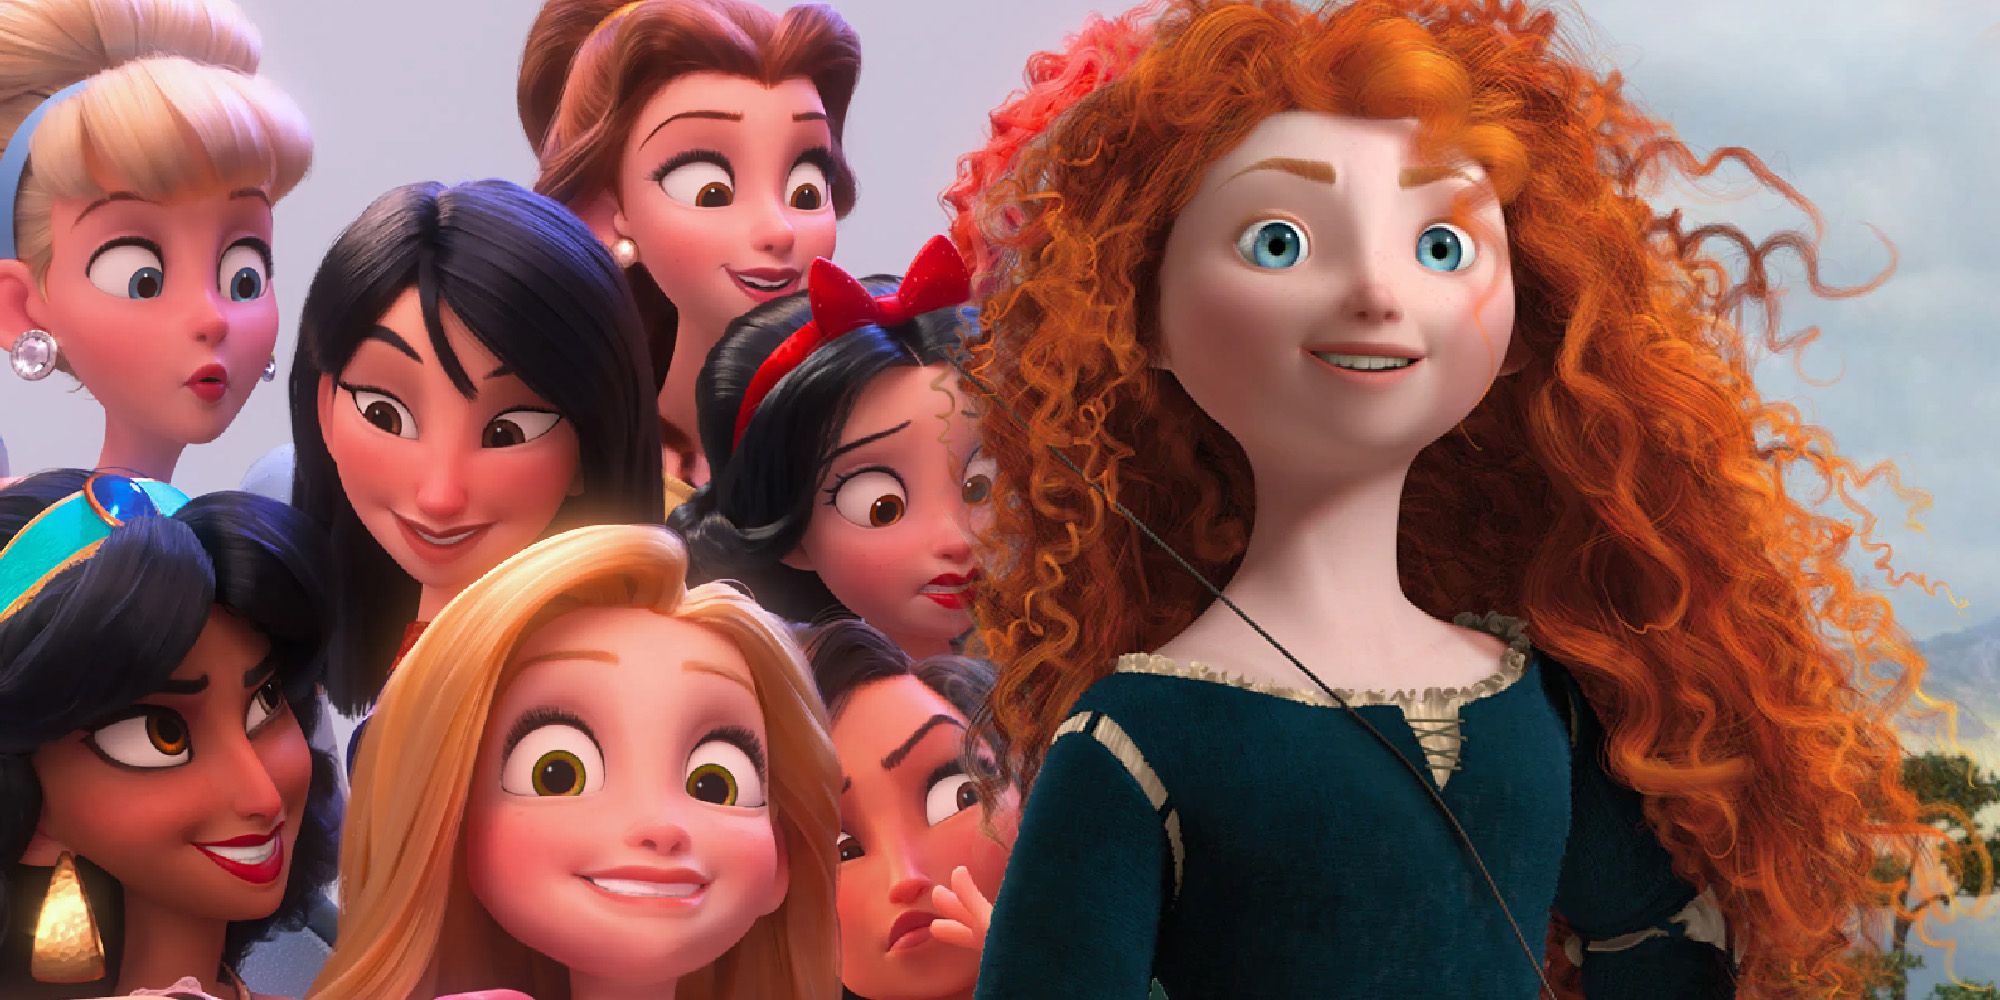 Brave: Actually a box-office disappointment?